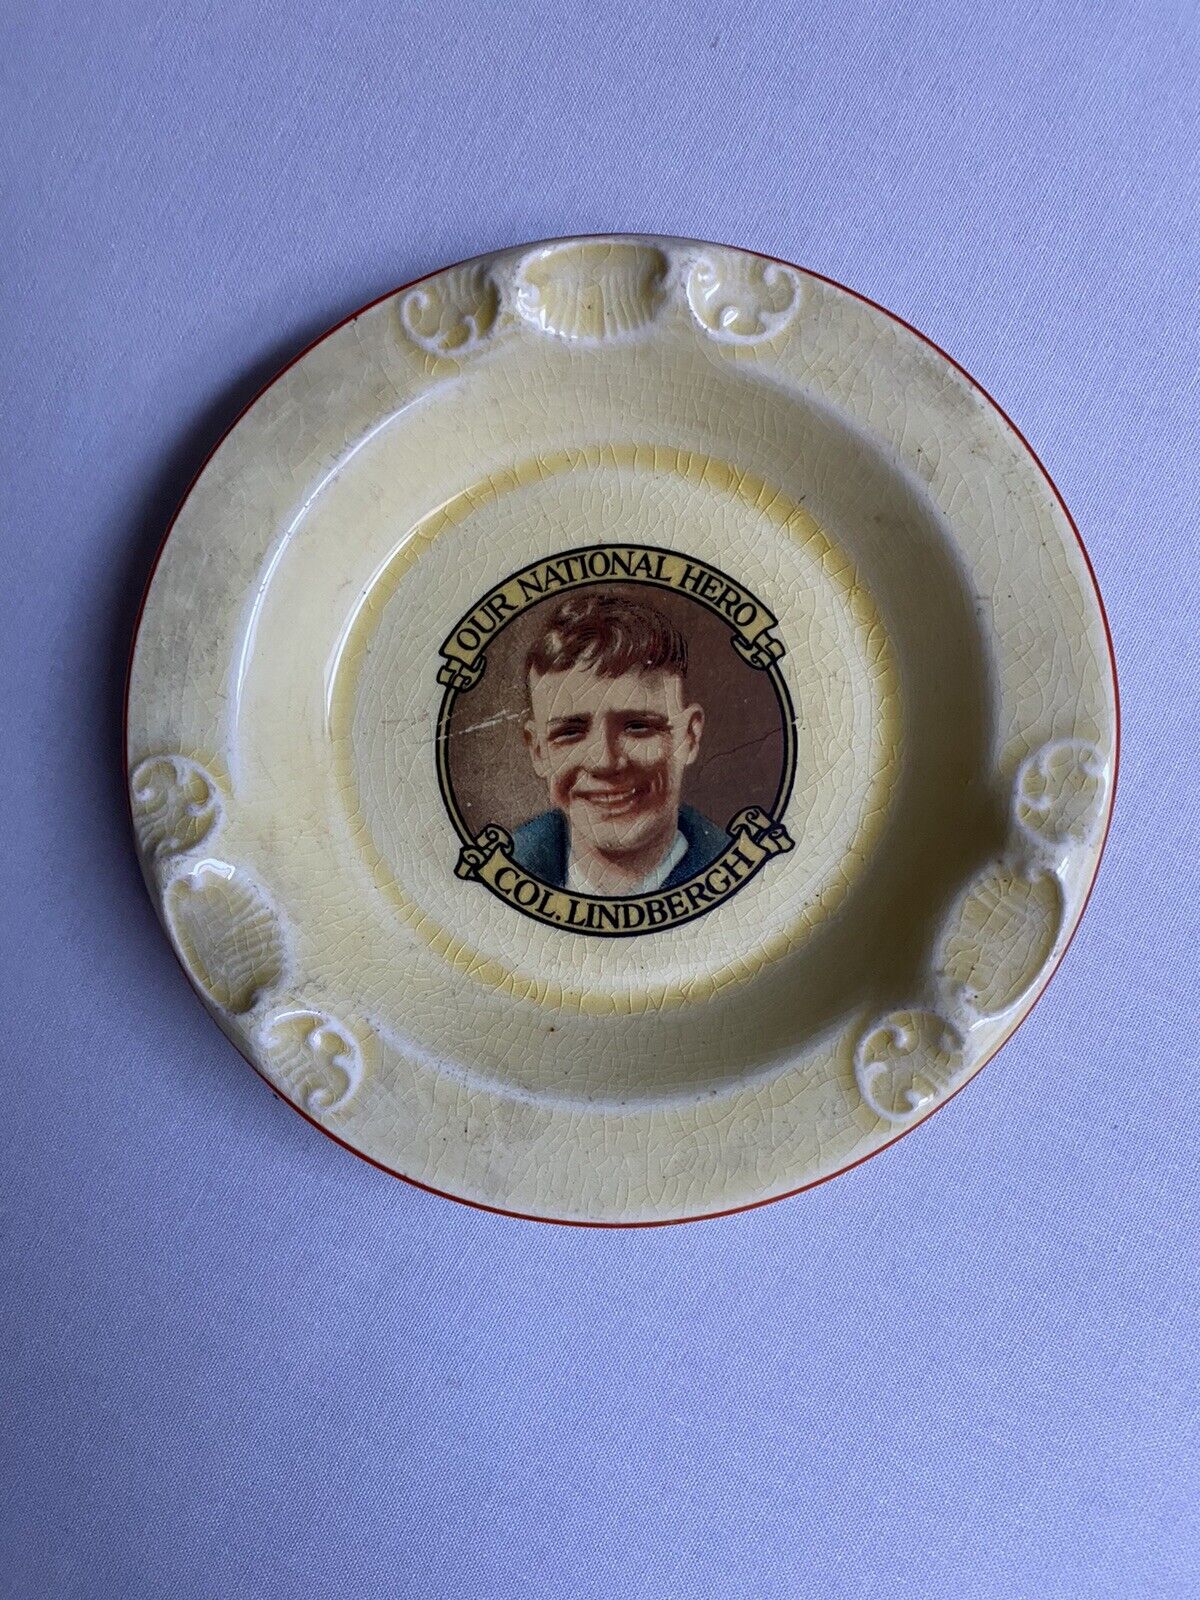 antique col. Lindbergh our national hero ashtray 